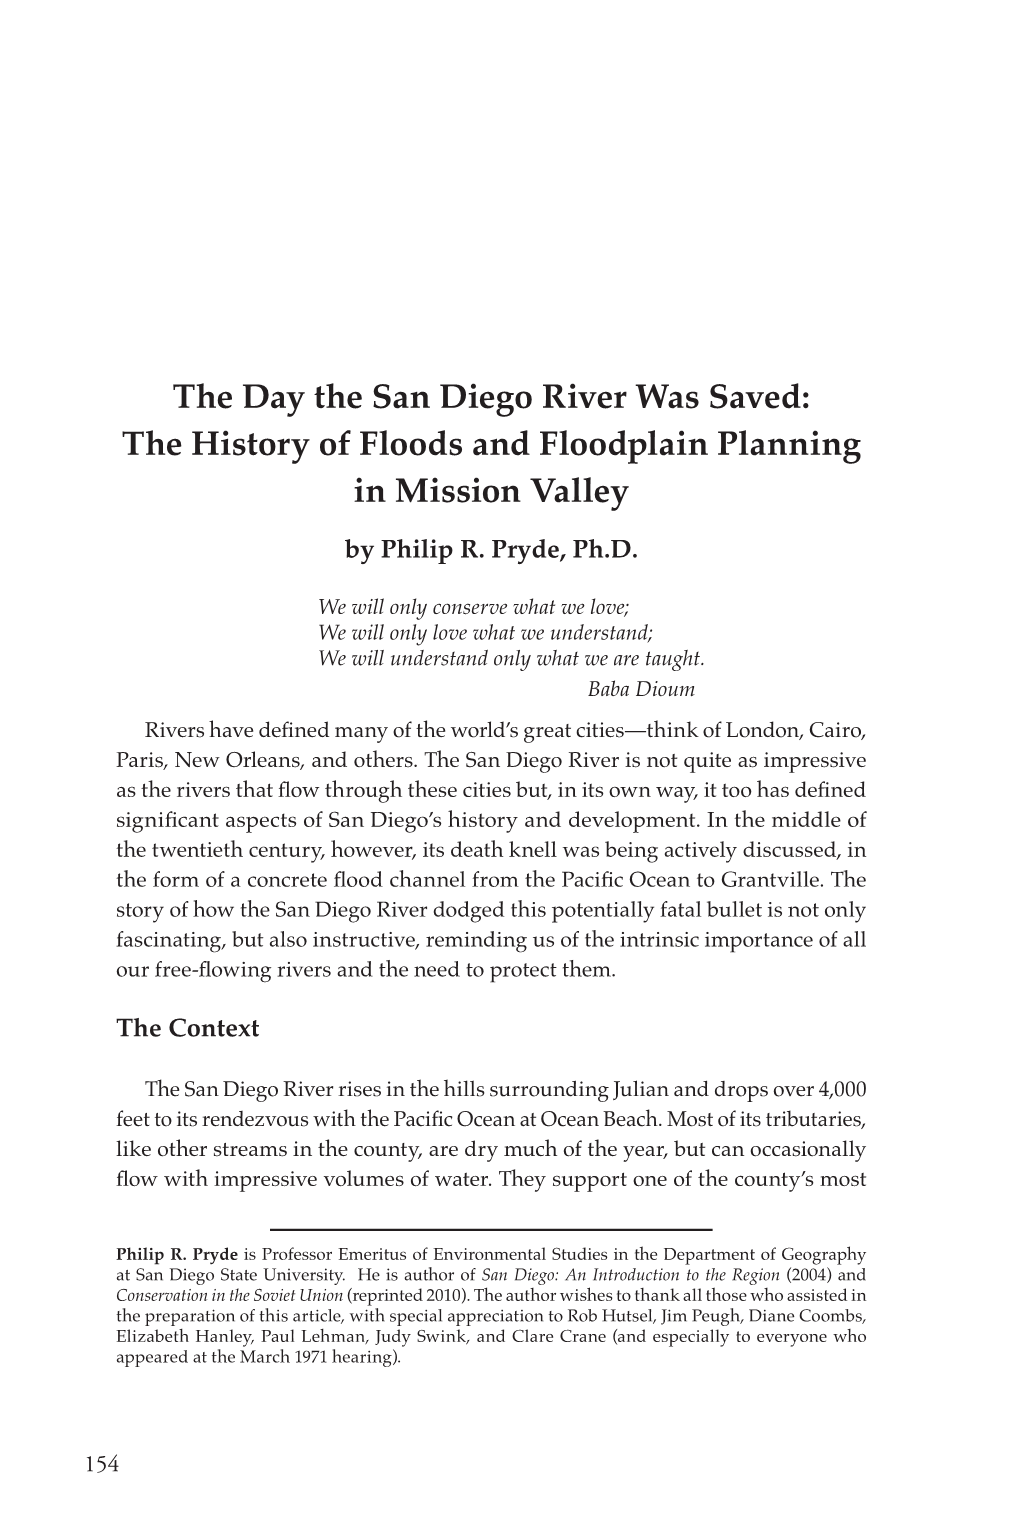 The History of Floods and Floodplain Planning in Mission Valley